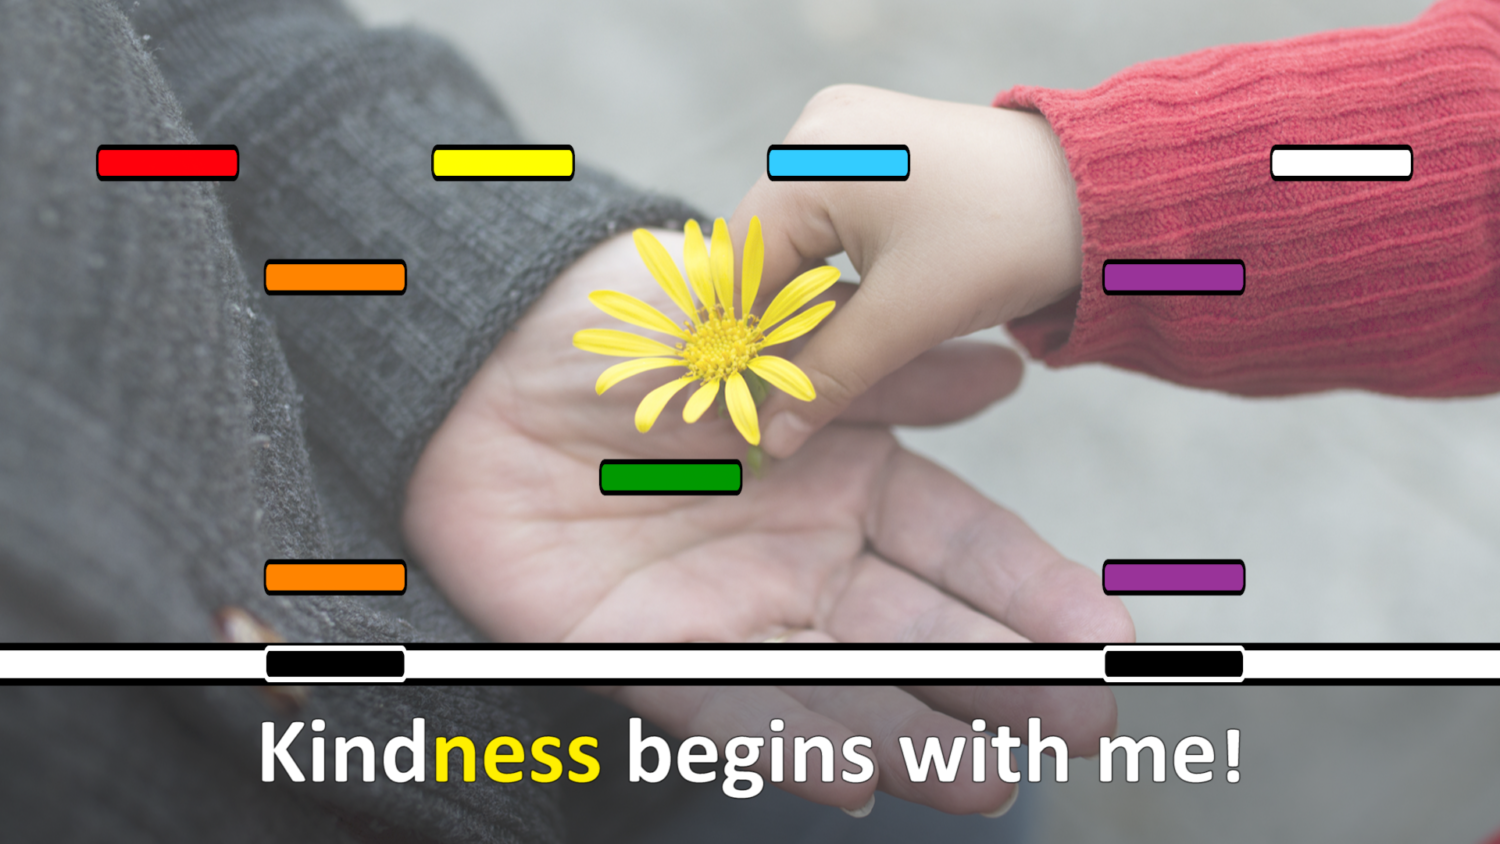 23 Kindness Begins with Me Singing Time Ideas Easy ideas for Music Leaders H Kindness Begins with Me0